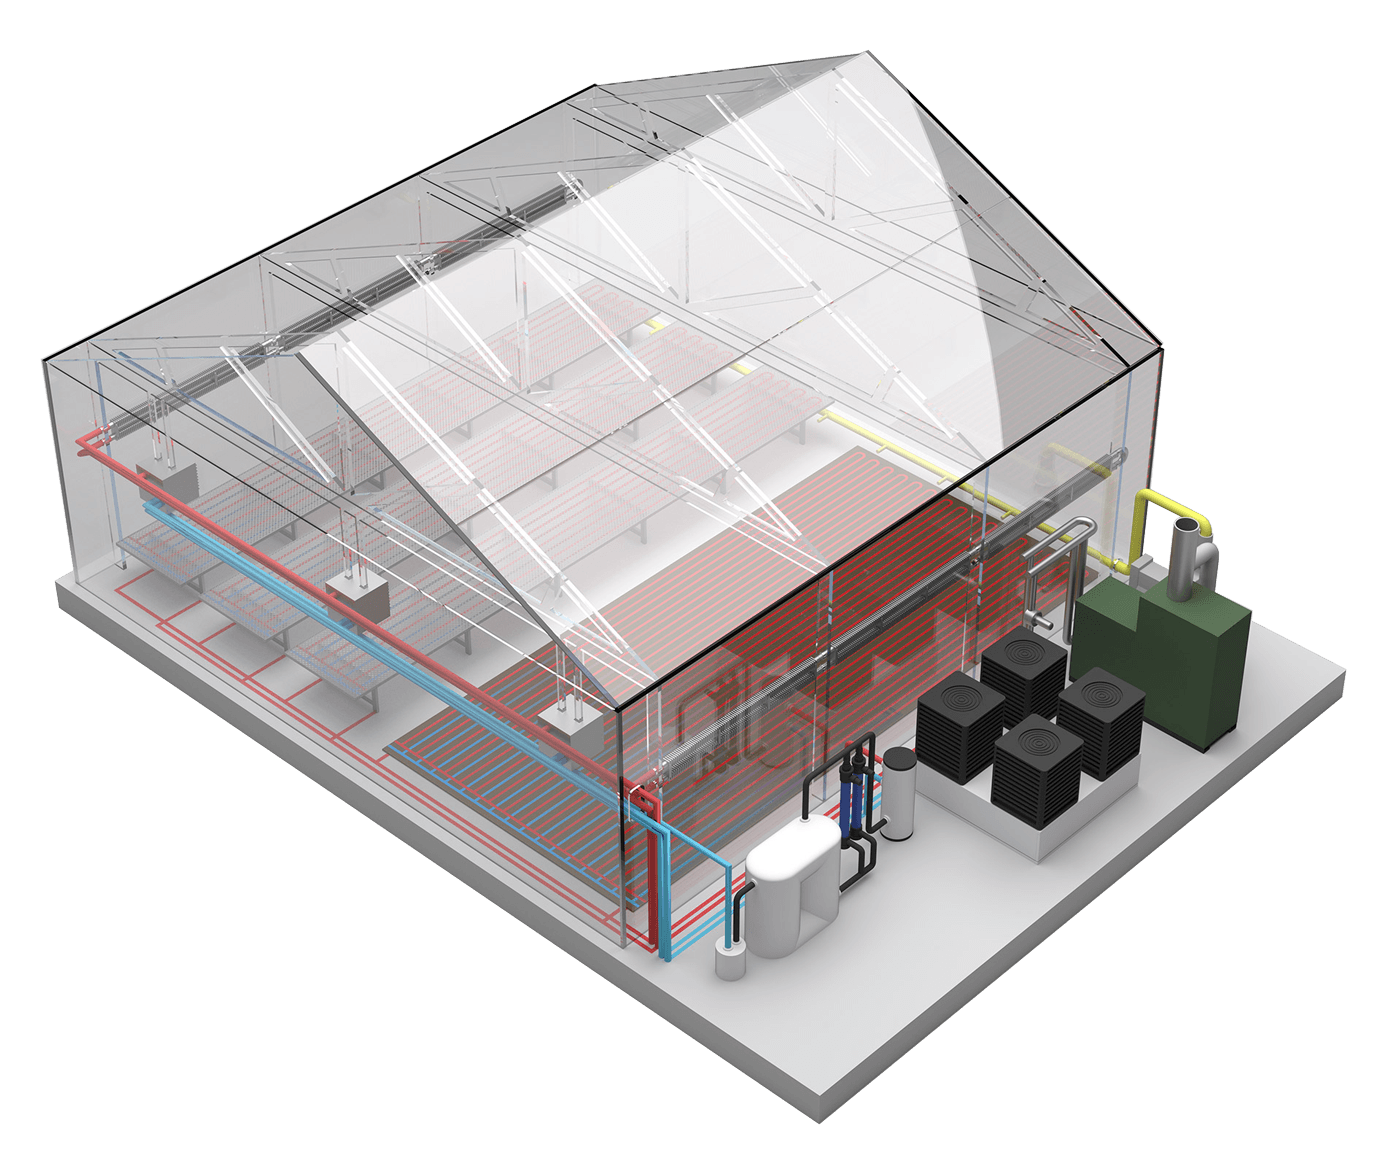 Image of rendered greenhouse